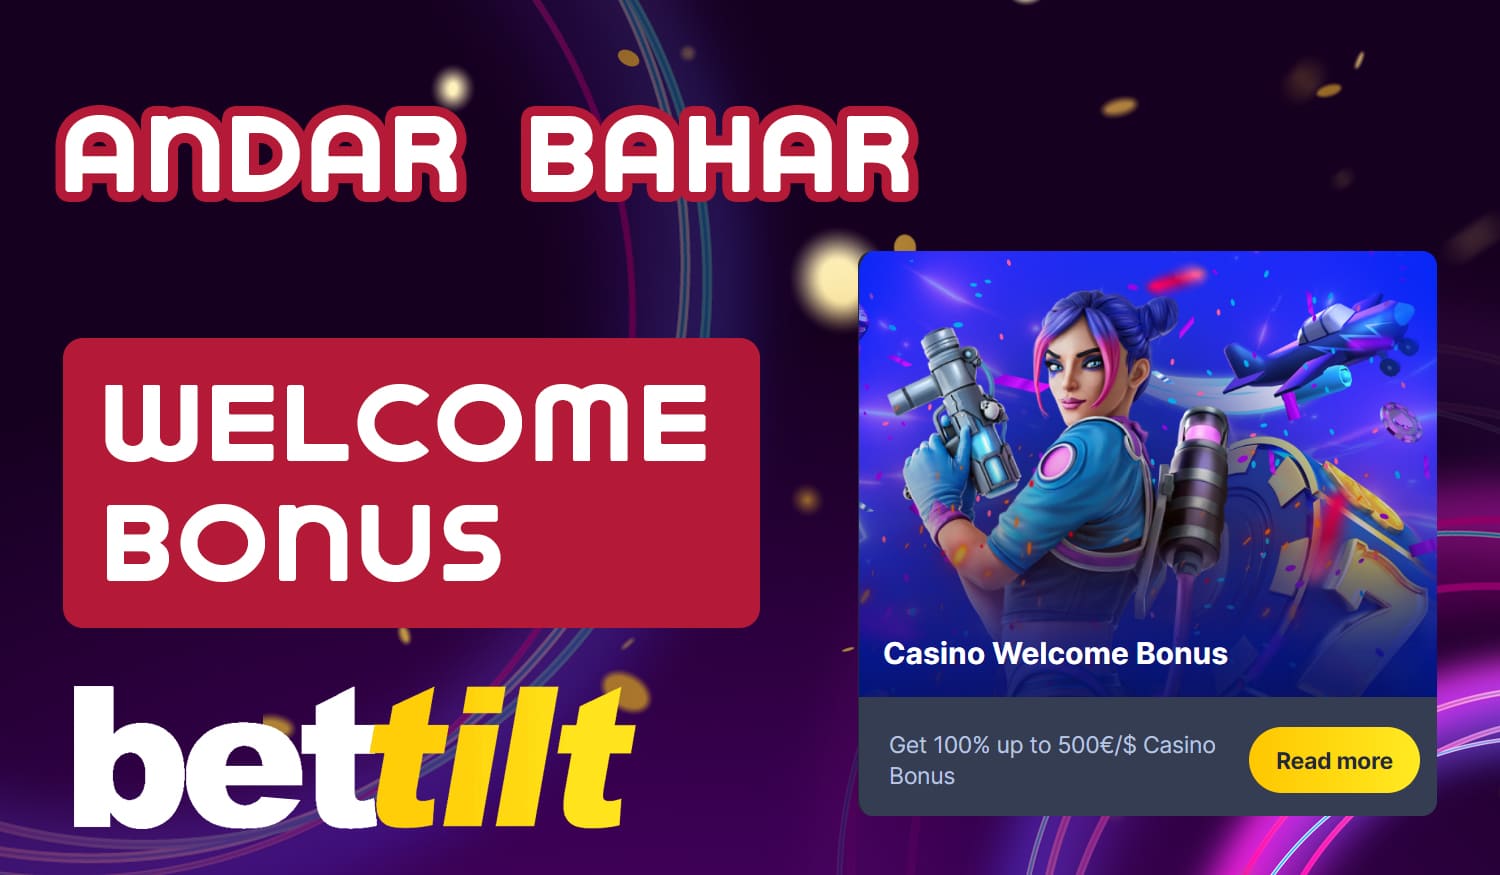 How to get and use Bettilt welcome bonus